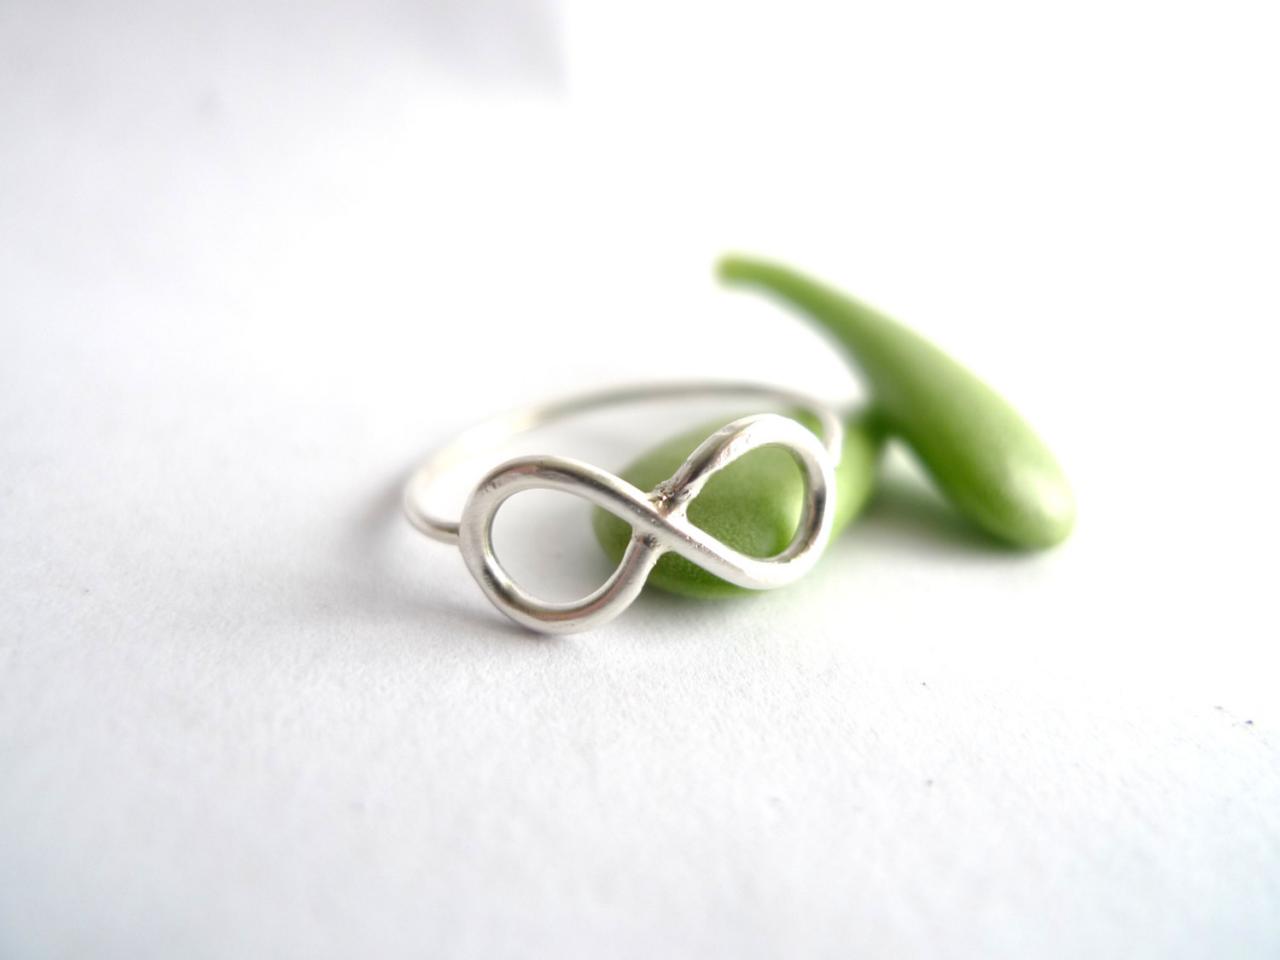 Sterling Silver Infinity Ring Made In Any Size Including Half And Quarter Sizes-simple Sophisticated Edgy Jewelry